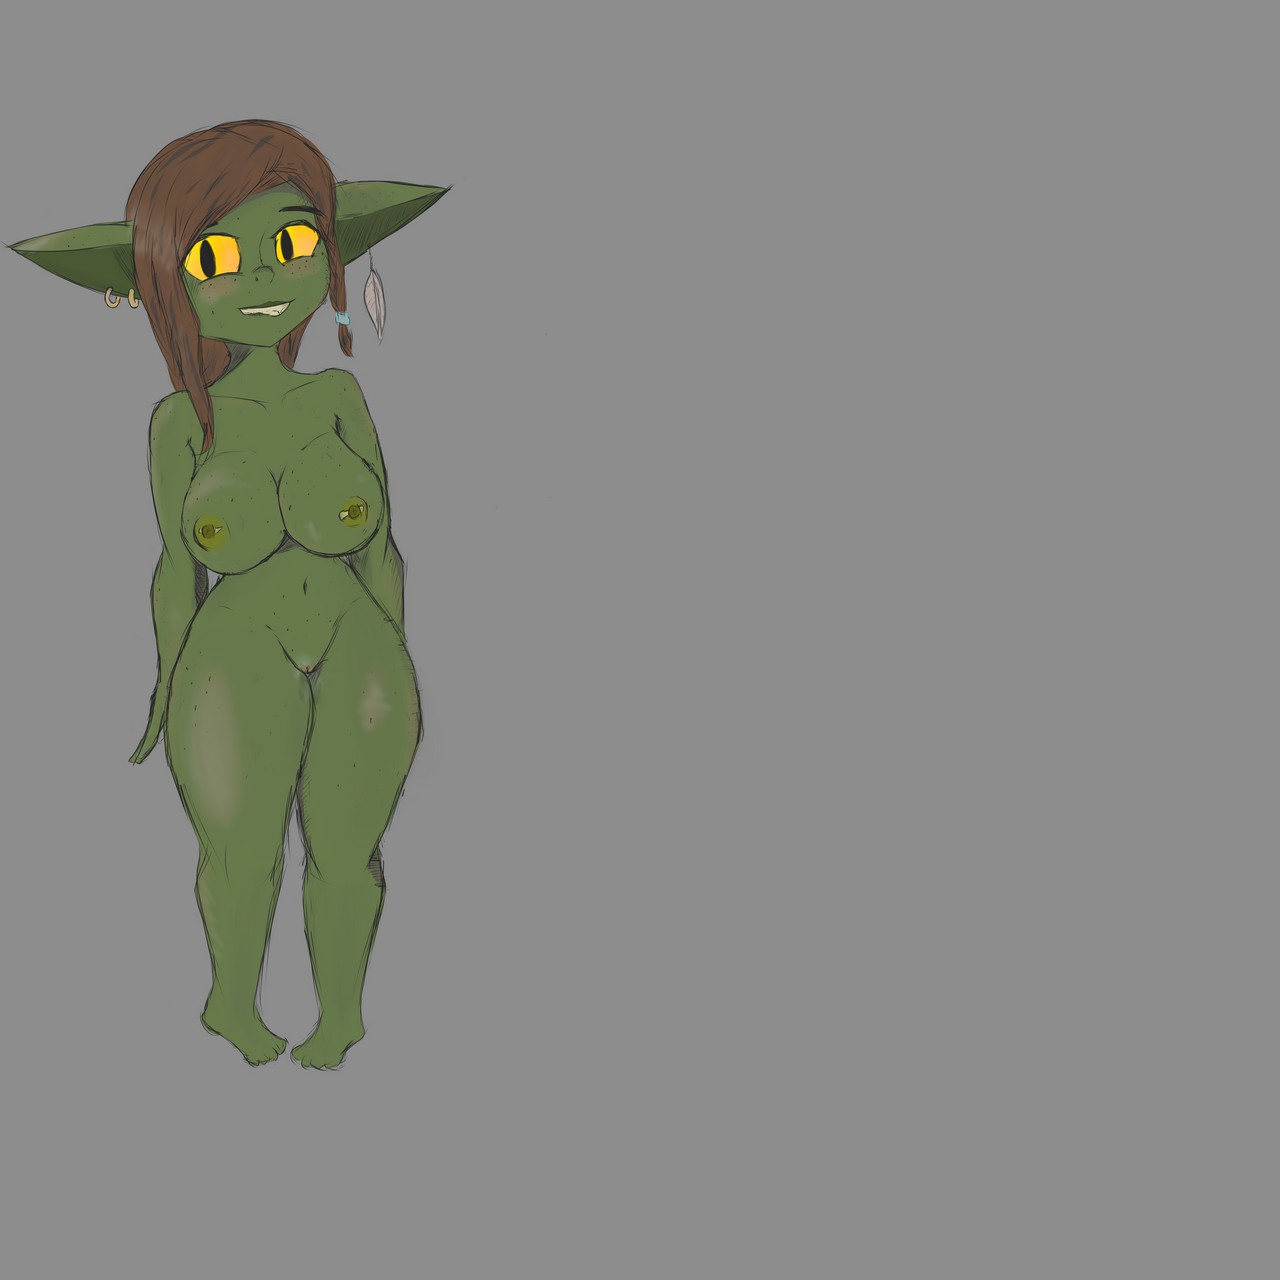 Decided To Make The Gobbo An Official Oc Of Mine